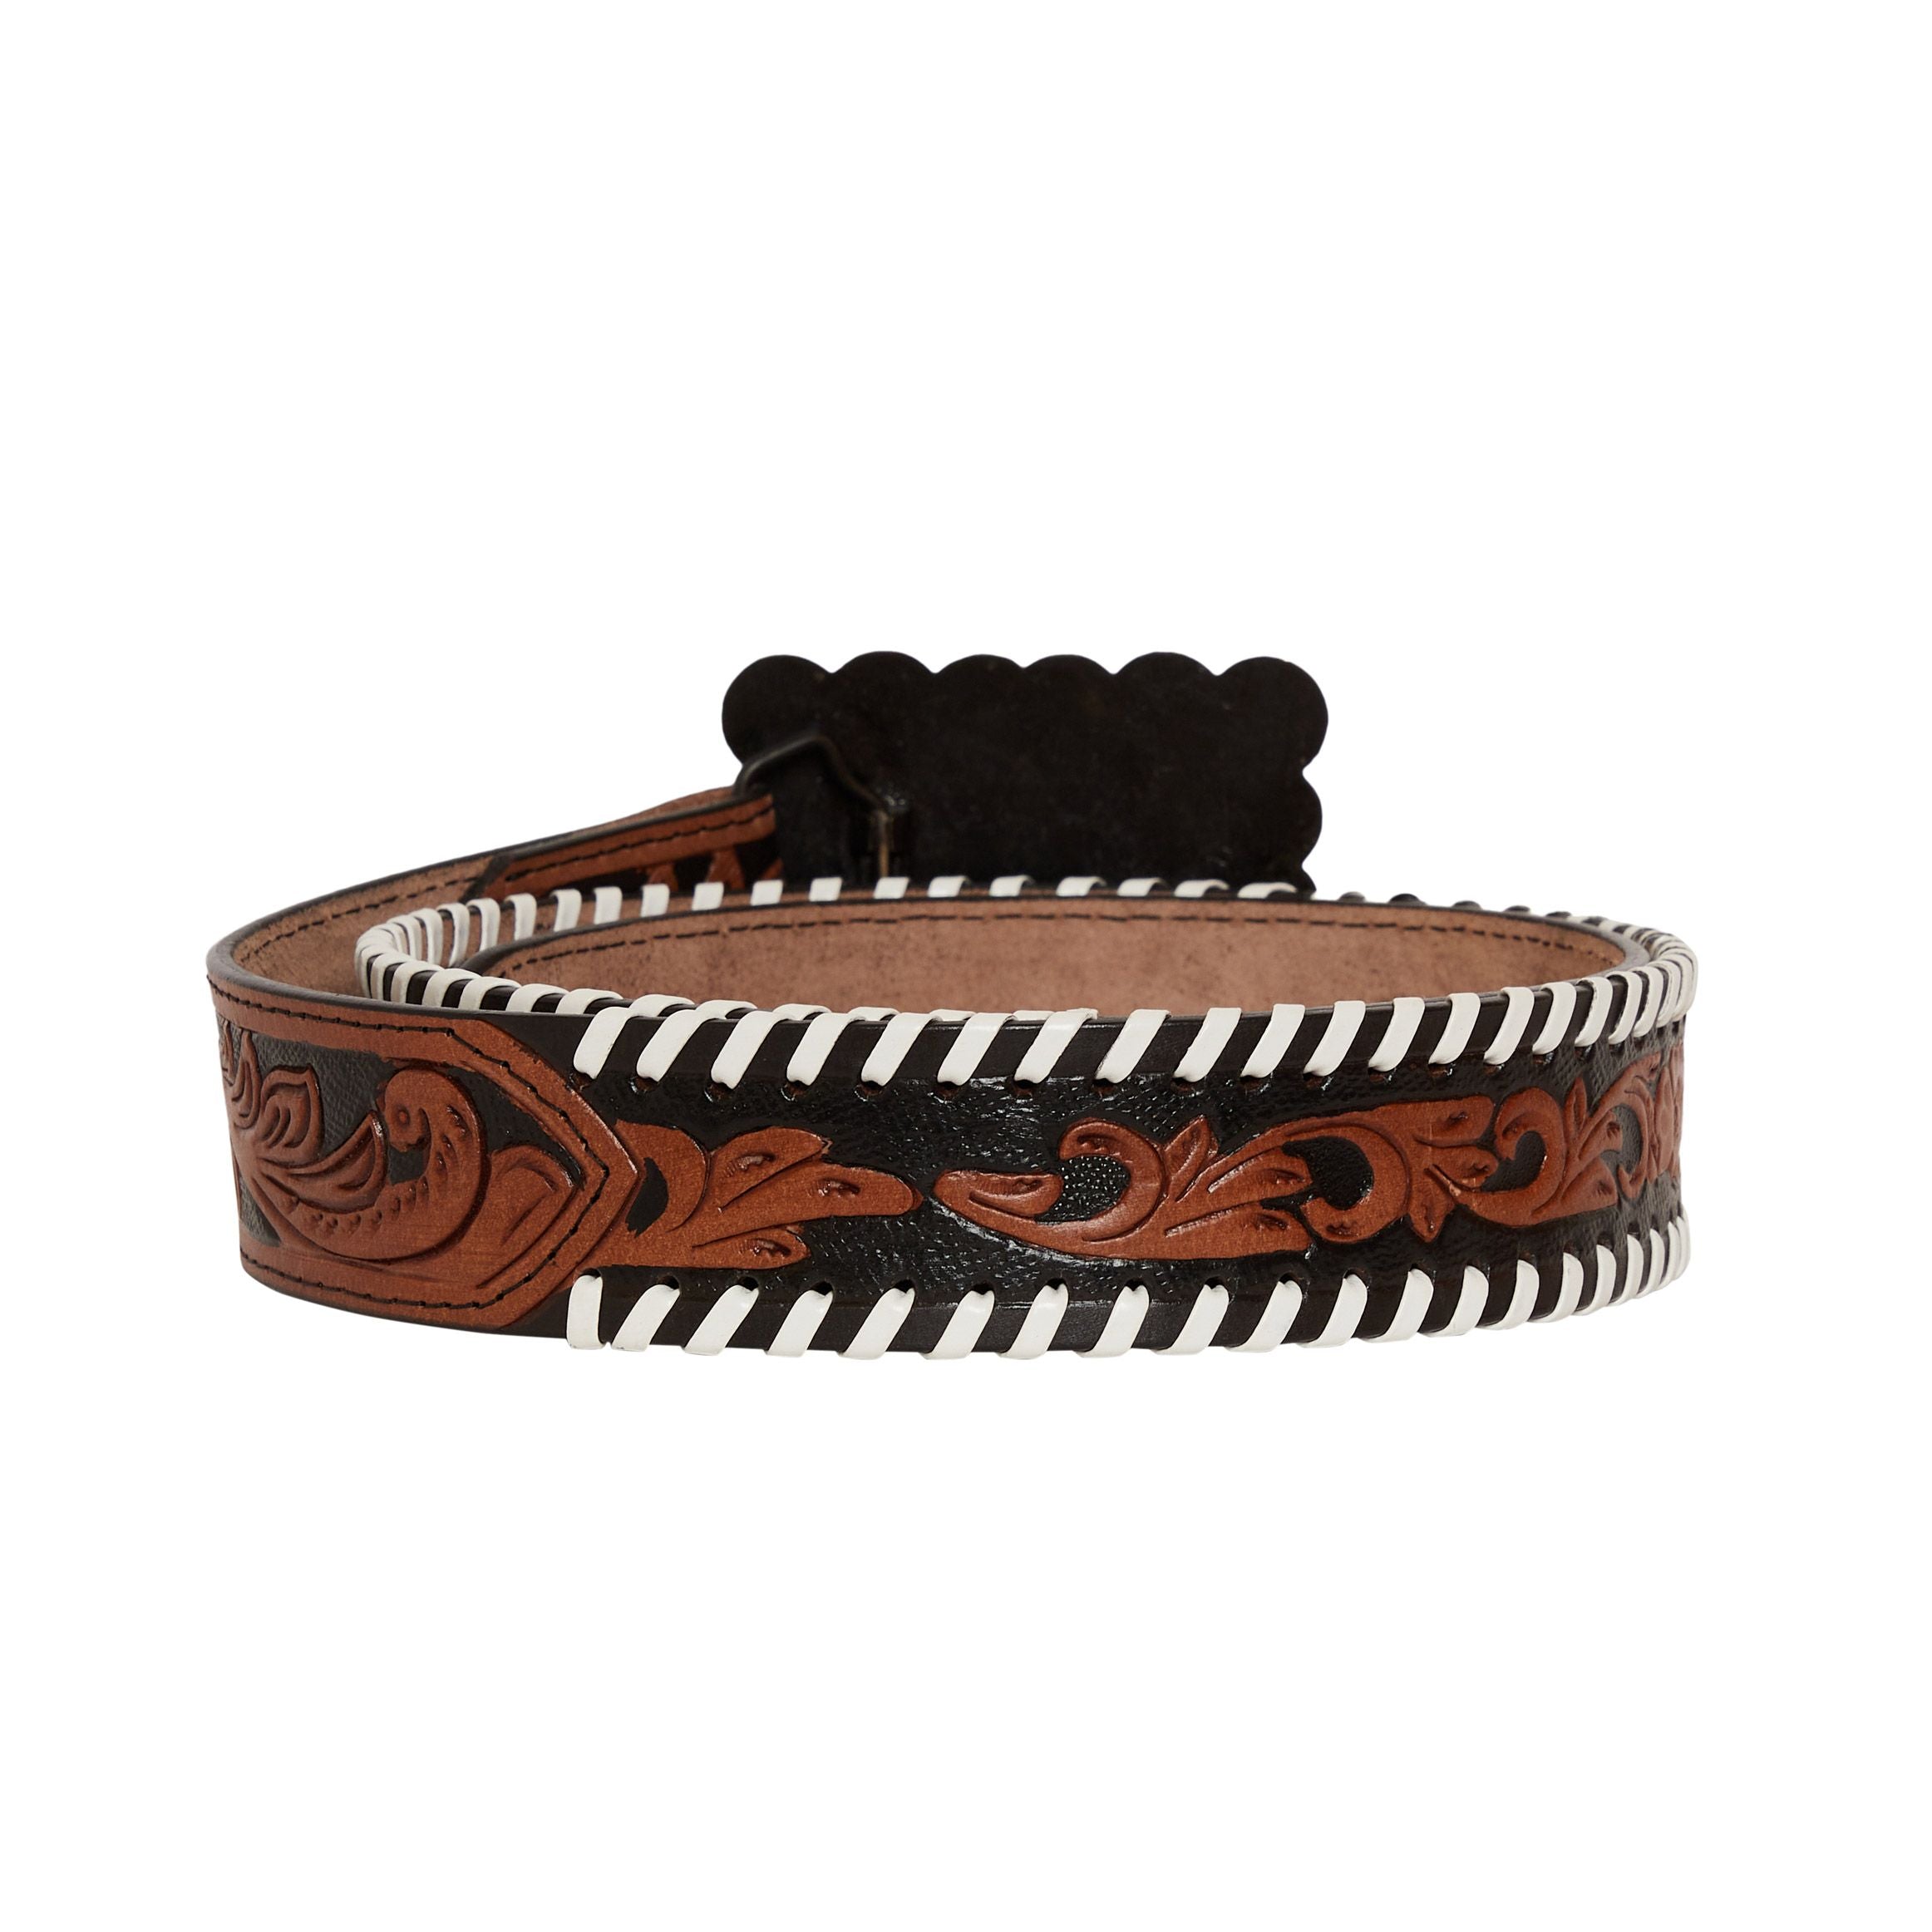 Myra Grave Brown Hand Tooled Leather Belt